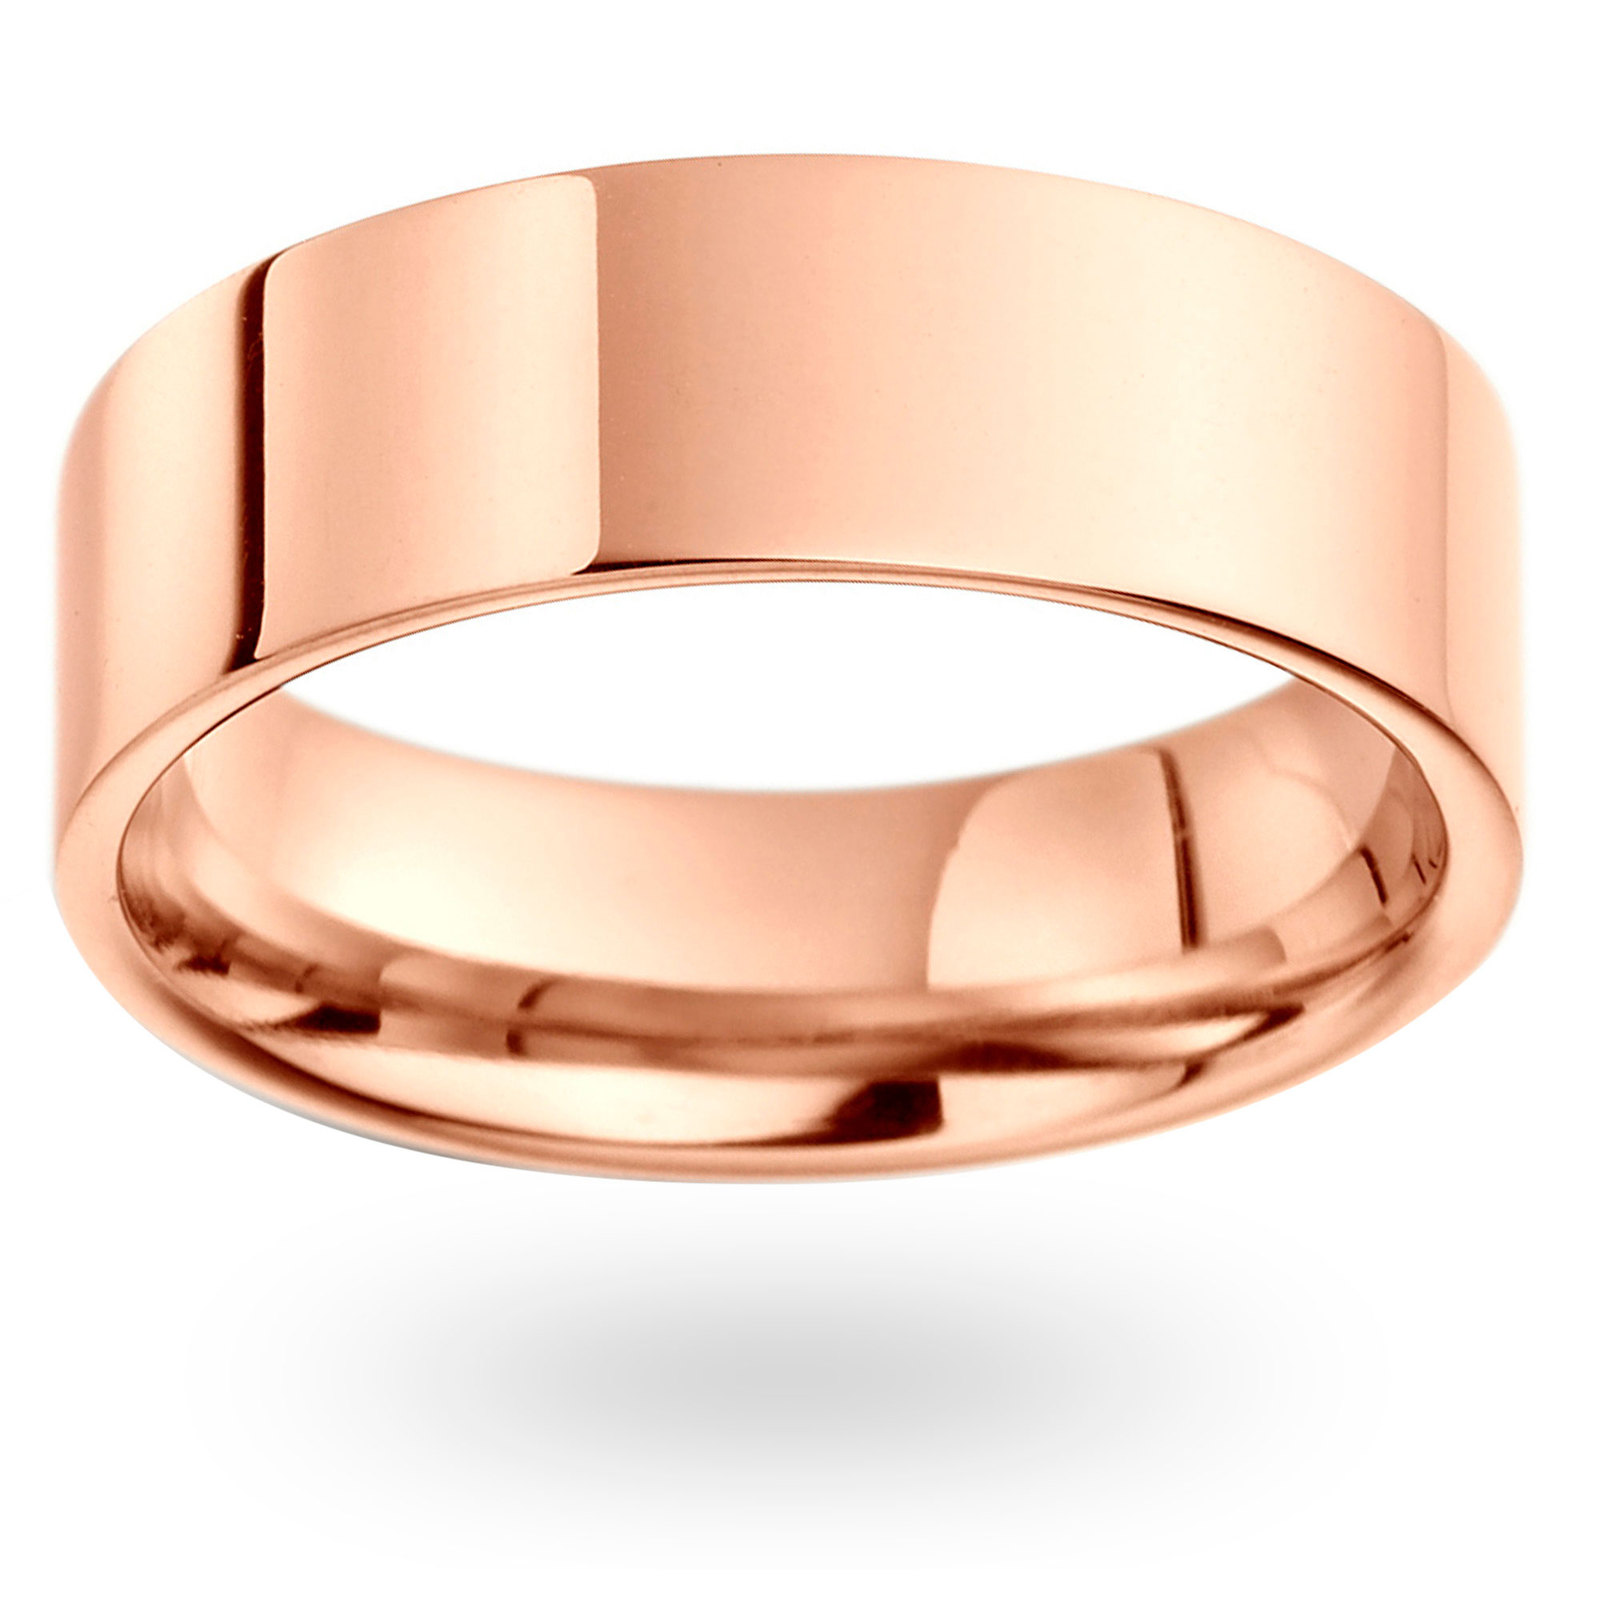 18ct Rose Gold 7mm Heavy Flat Court Wedding Ring | Rings | Jewellery ...